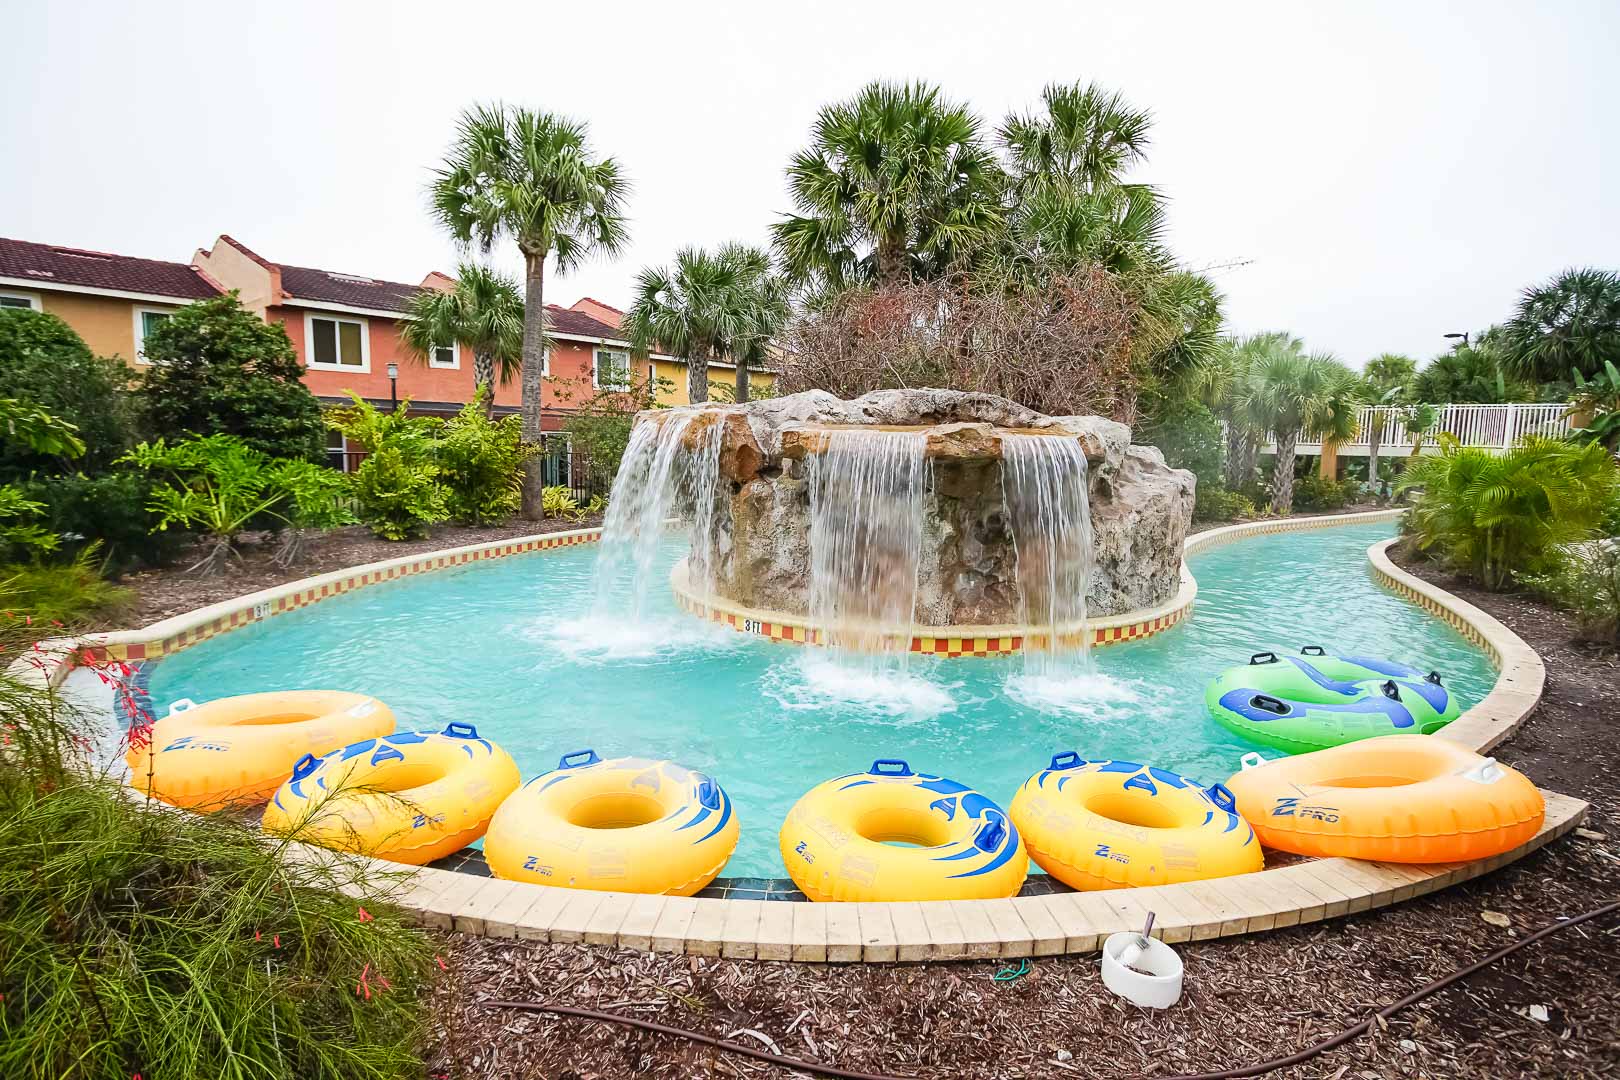 A colorful view of the outdoor lazy river pool at VRI's Fantasy World Resort in Florida.